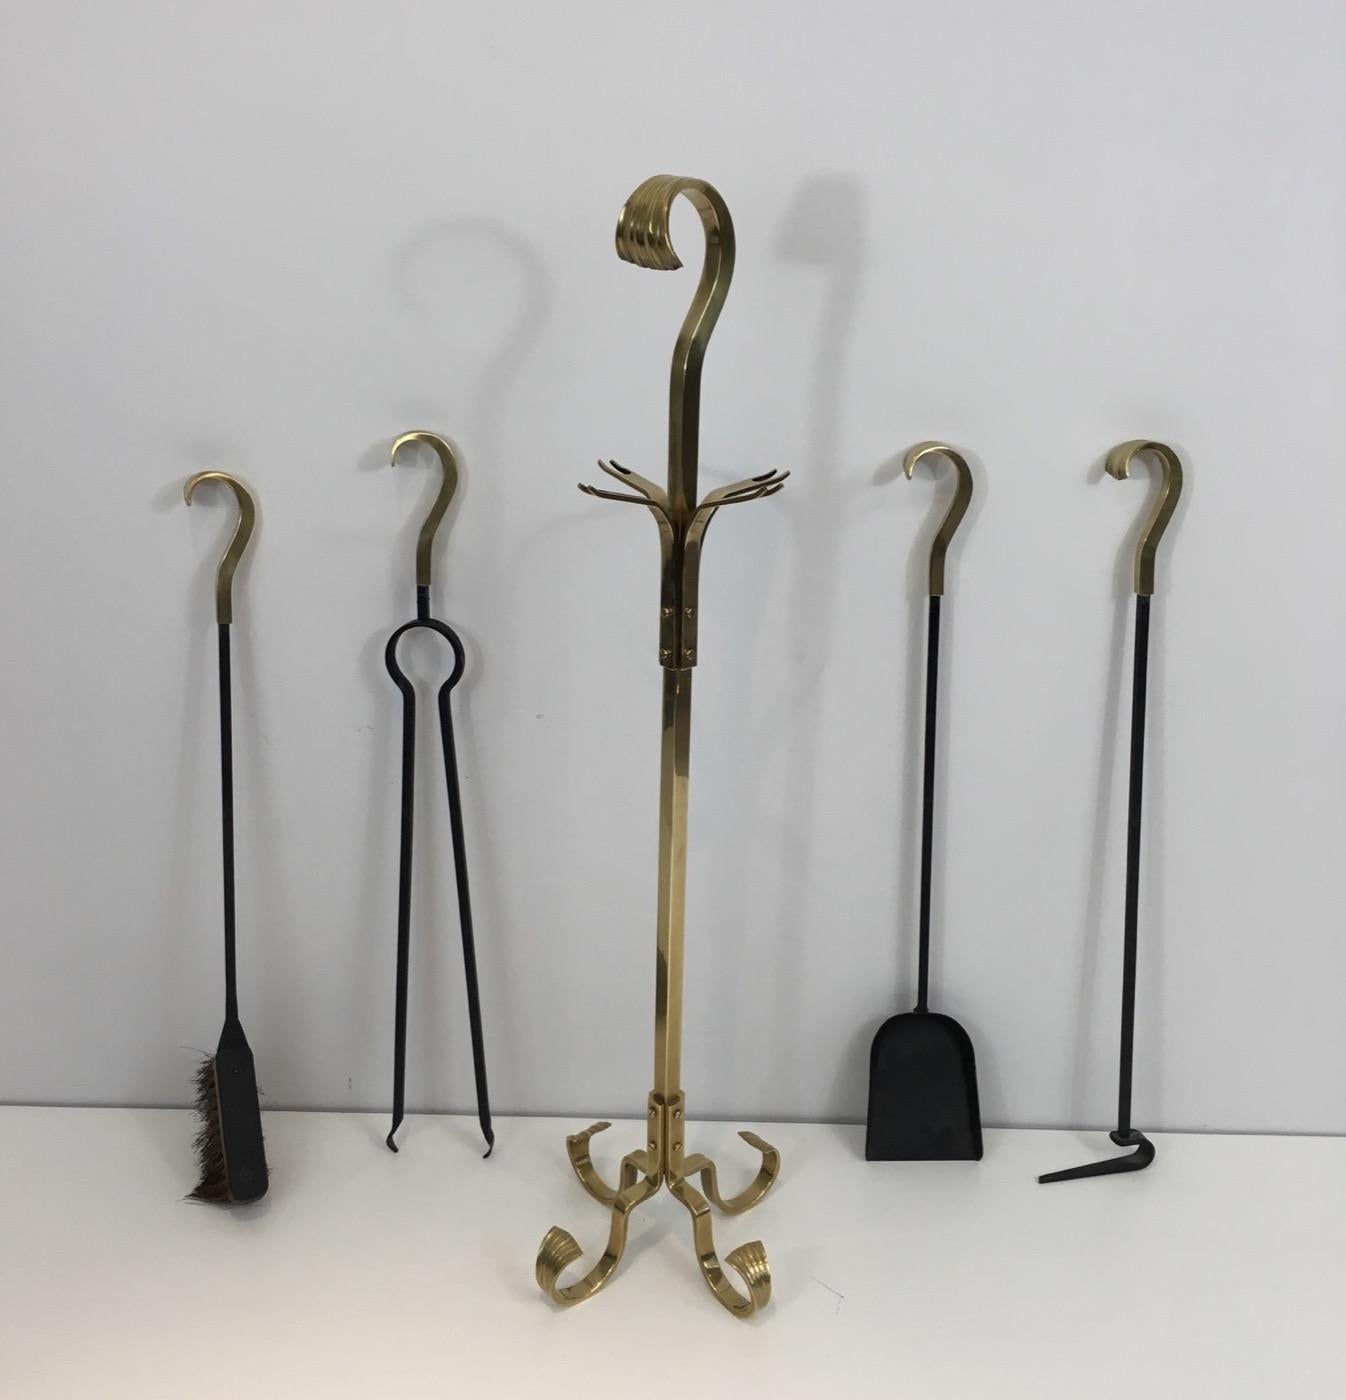 Bronze and iron fire place tools, French, circa 1970.